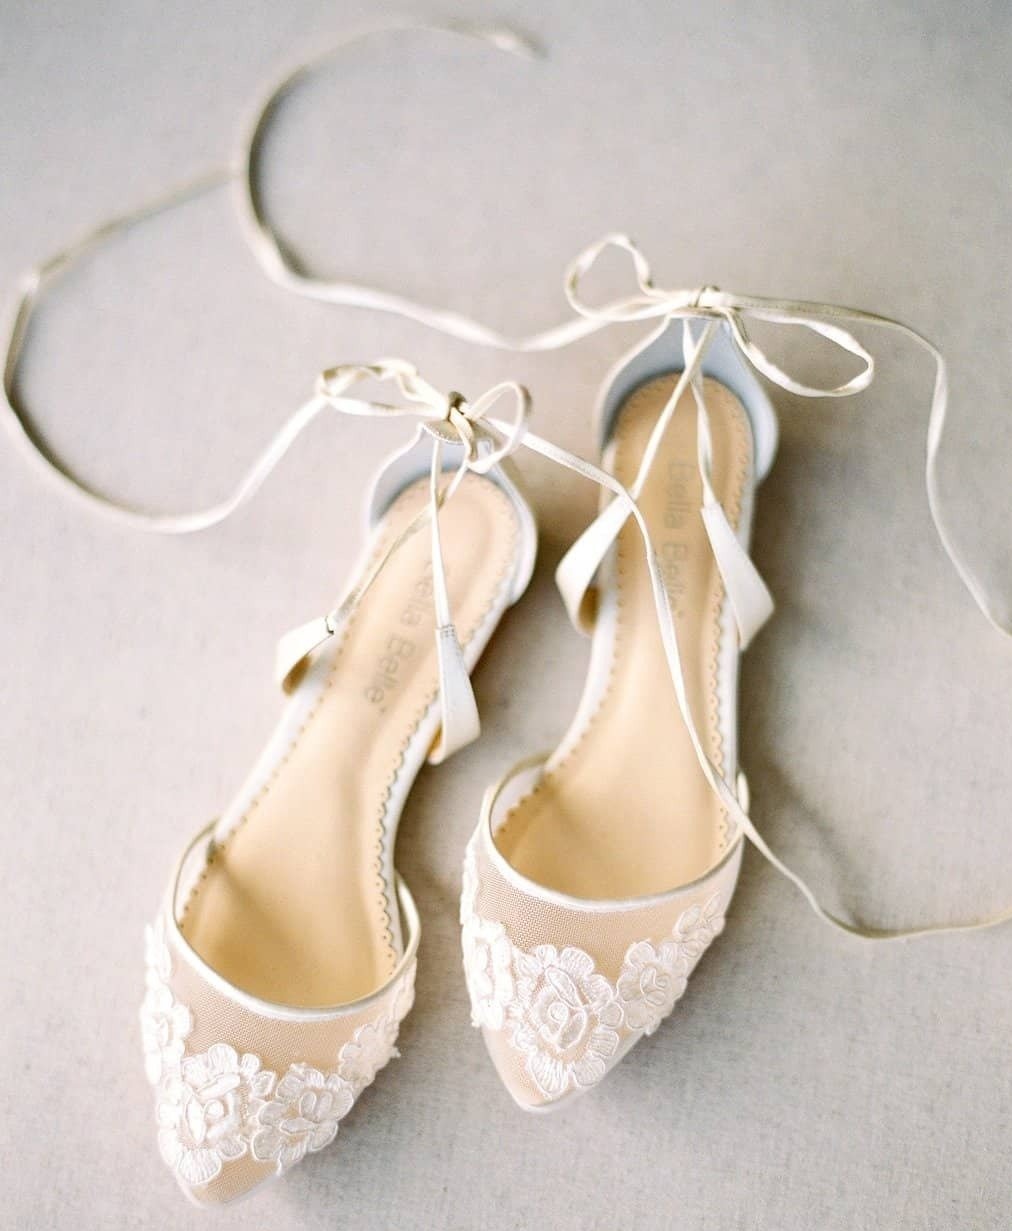 Alicia Ballerina Lace Wedding Heels in Ivory by Bella Belle Shoes